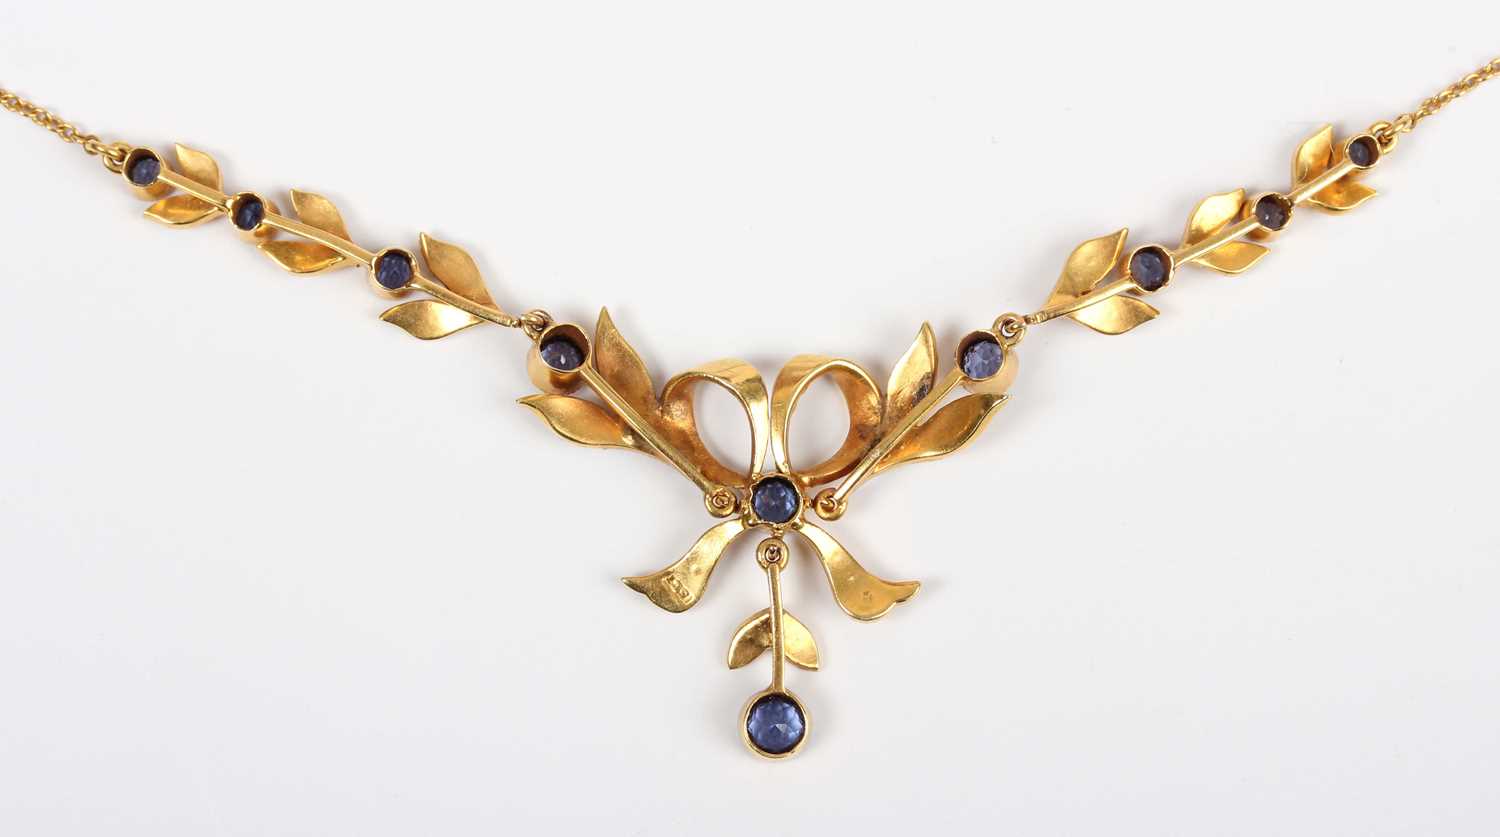 An Edwardian gold, sapphire and seed pearl necklace, the front designed as a tied bow with foliate - Image 3 of 3